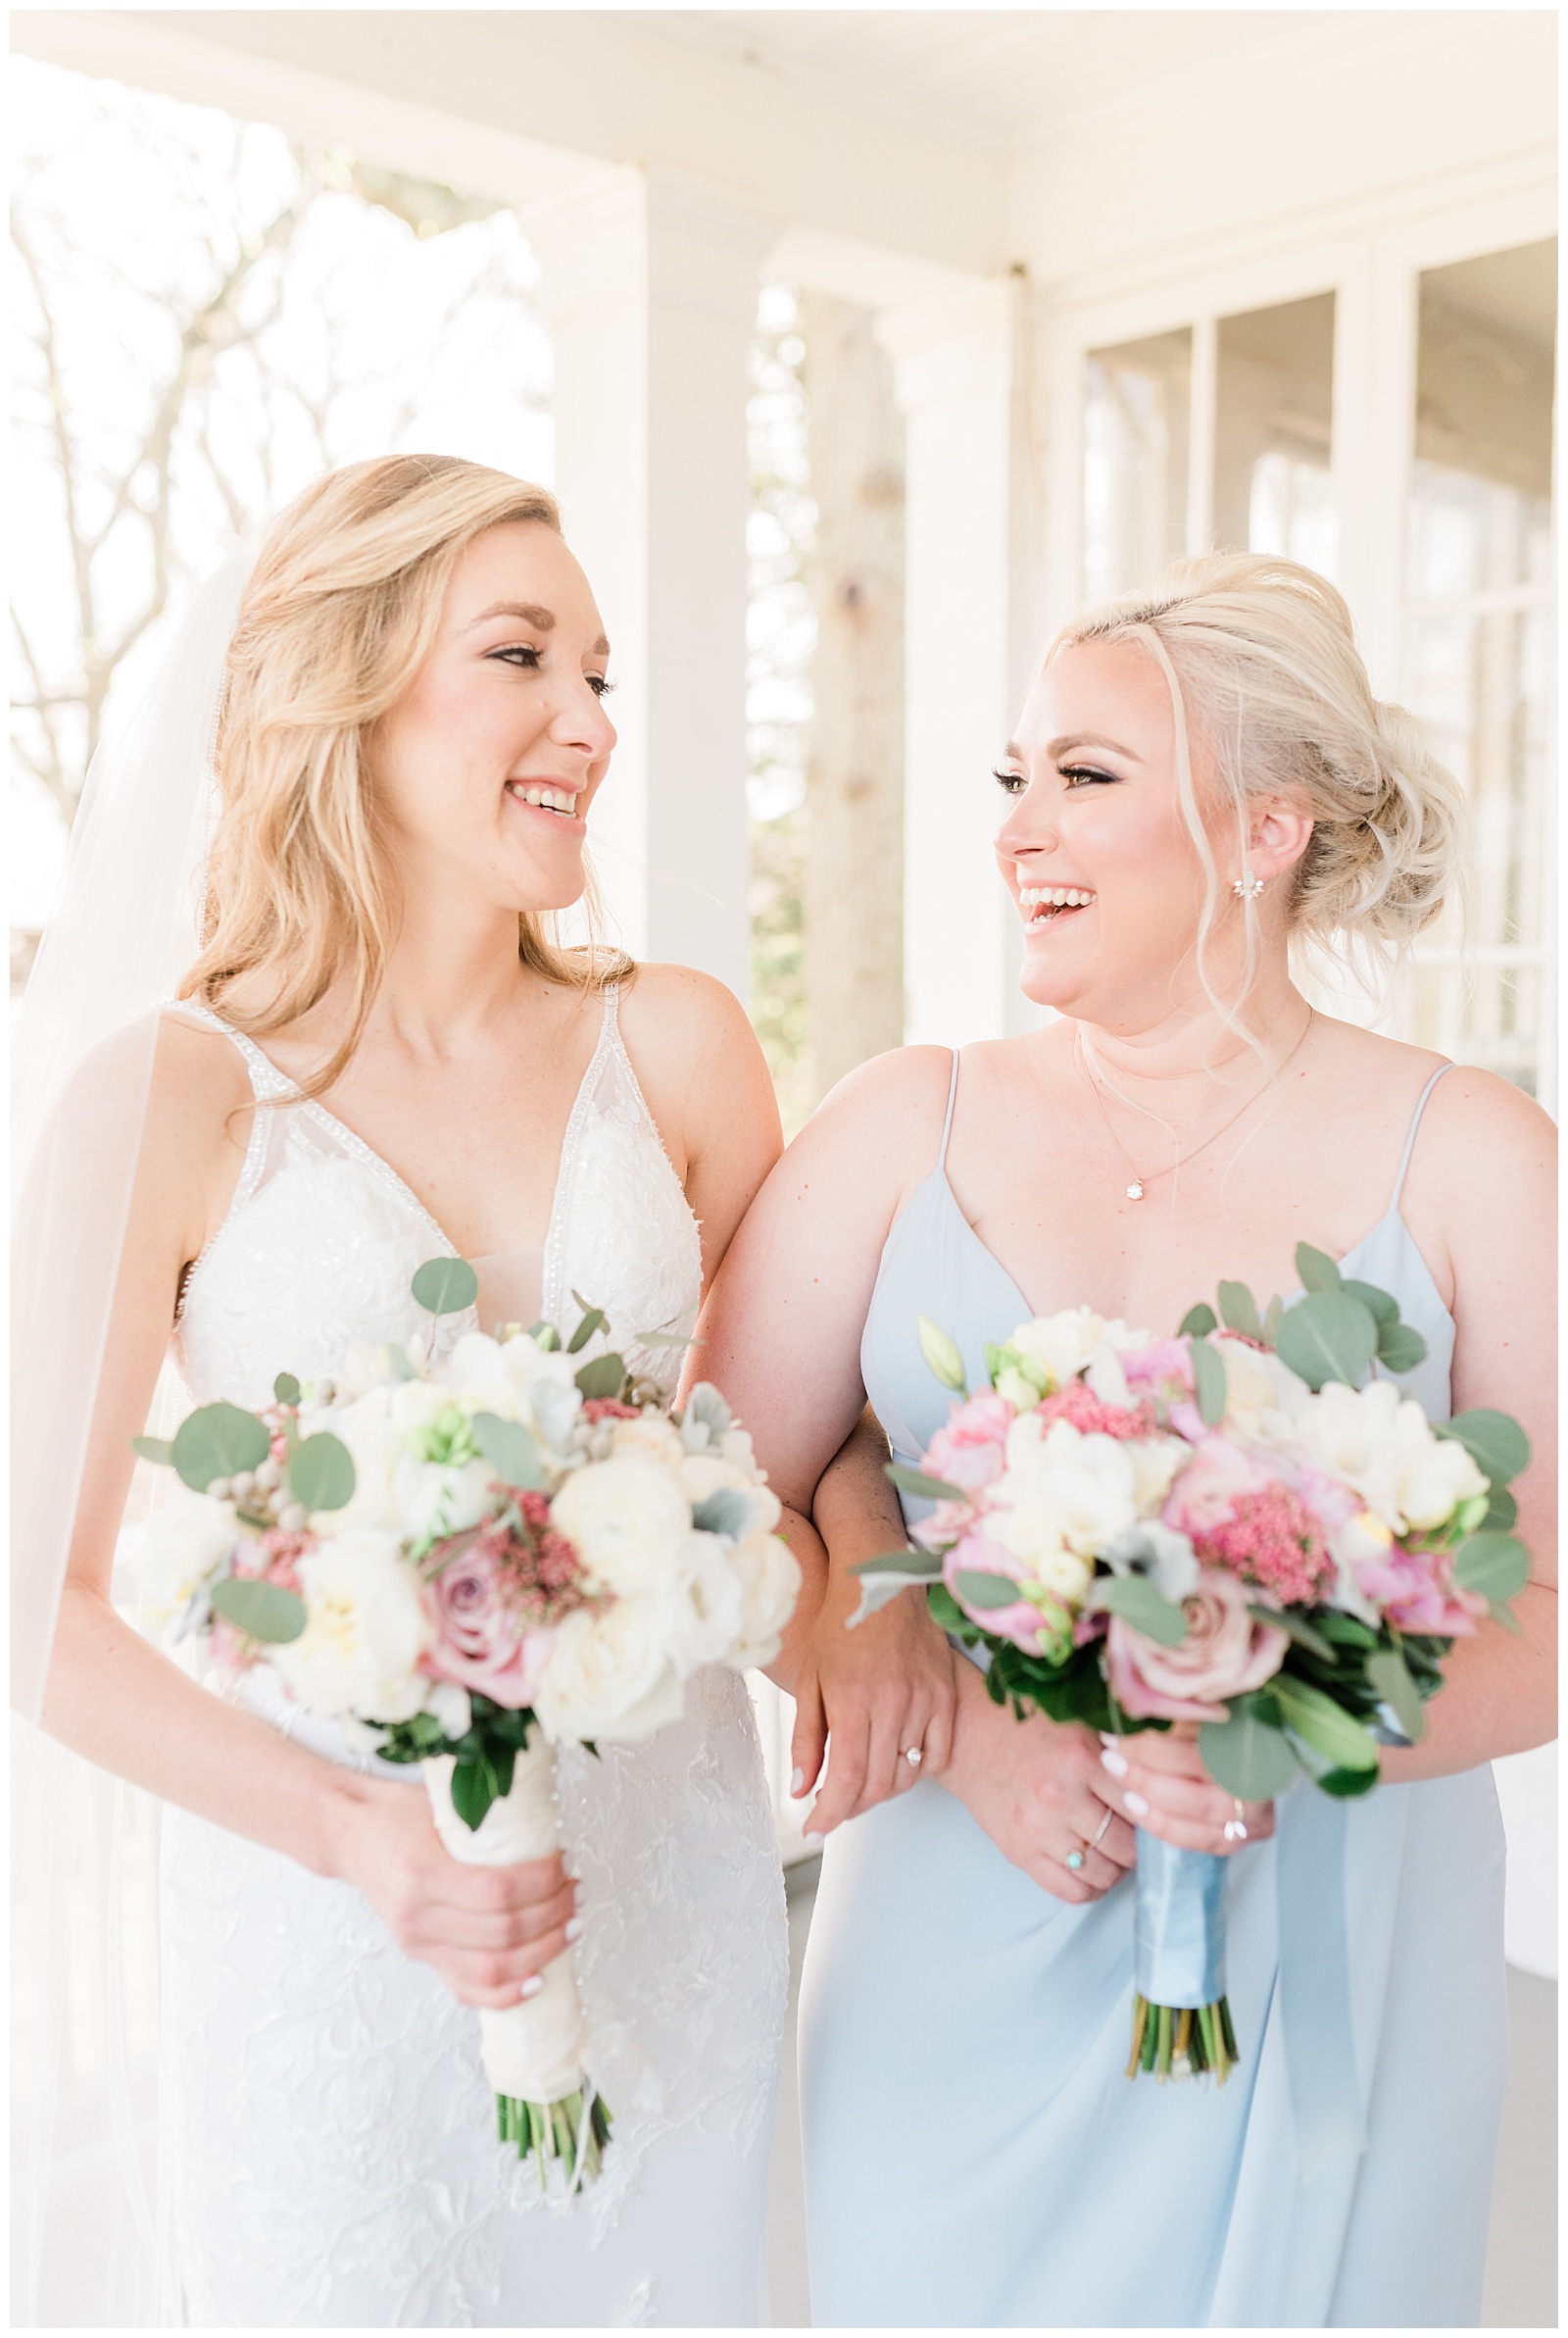 Bride and maid of honor laugh while holding their bouquets of white and pink flowers and eucalyptus leaves.